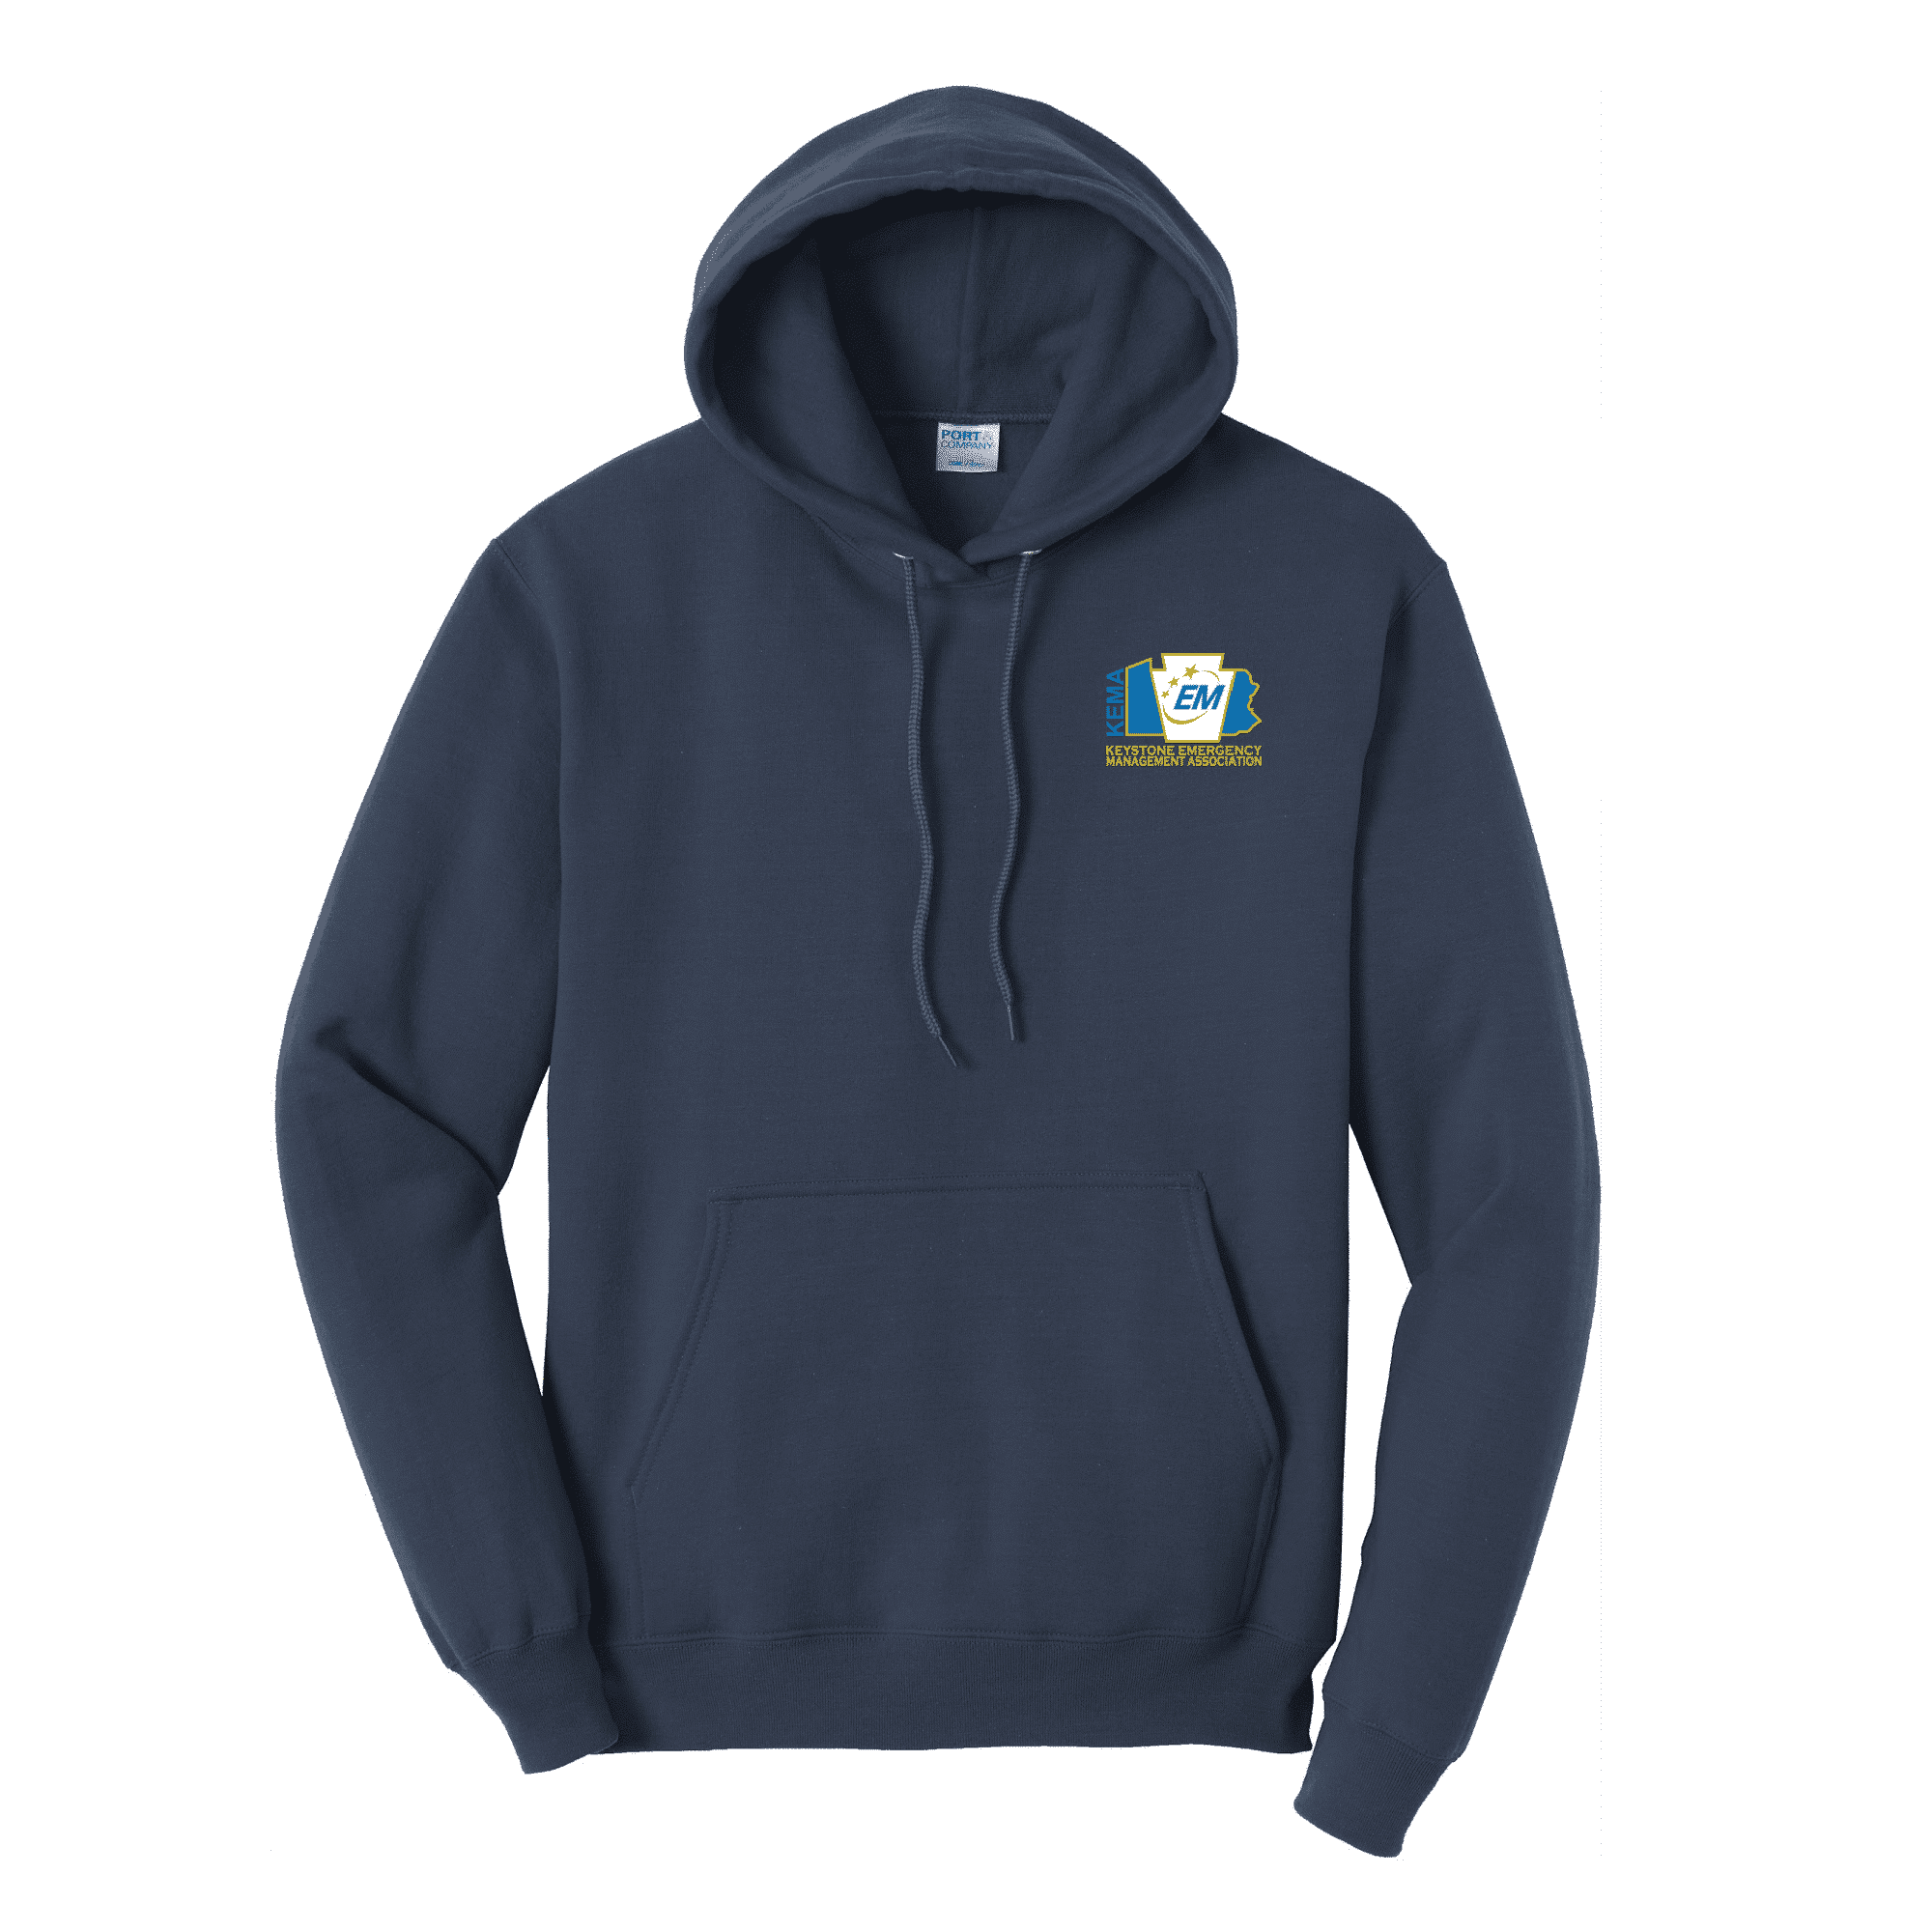 KEMA - PC78H Port & Co. Core Hoodie - Embroidered Design